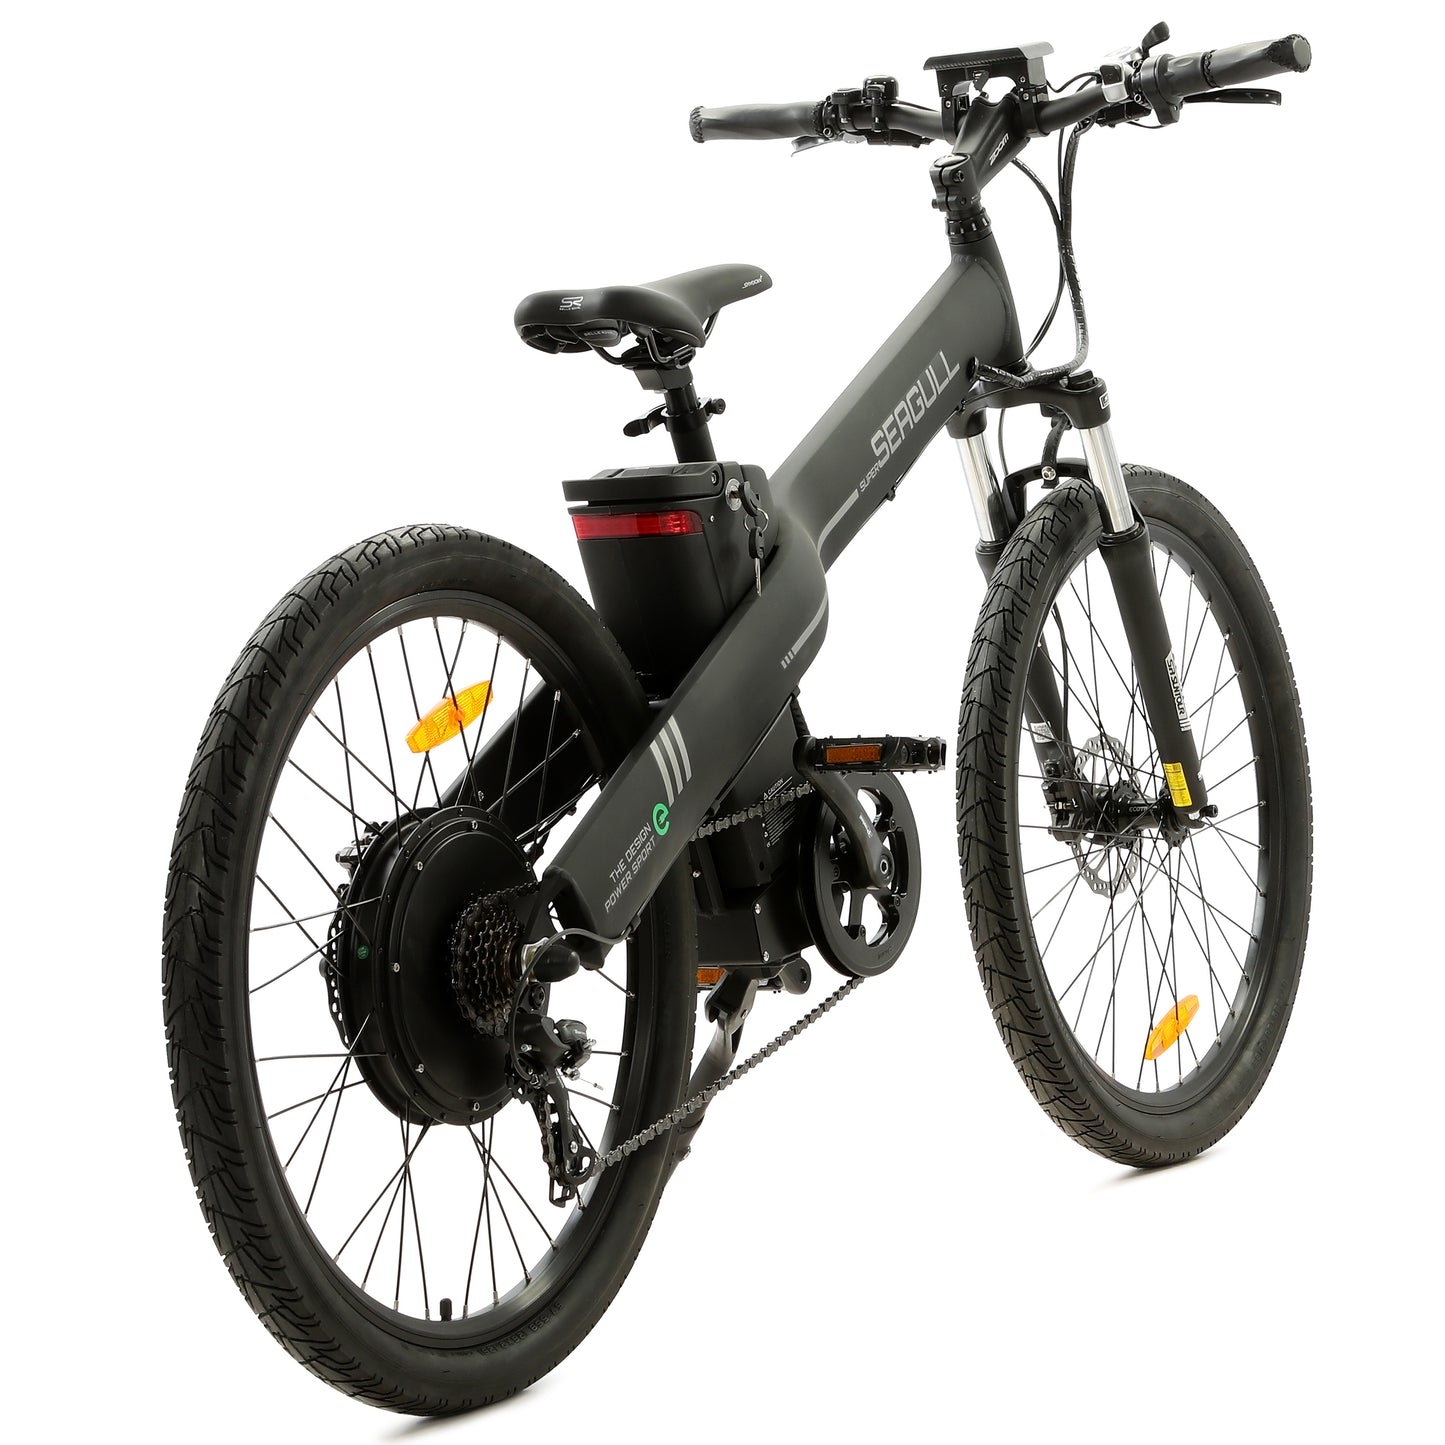 Ecotric Seagull Electric Mountain Bicycle - Matt Black